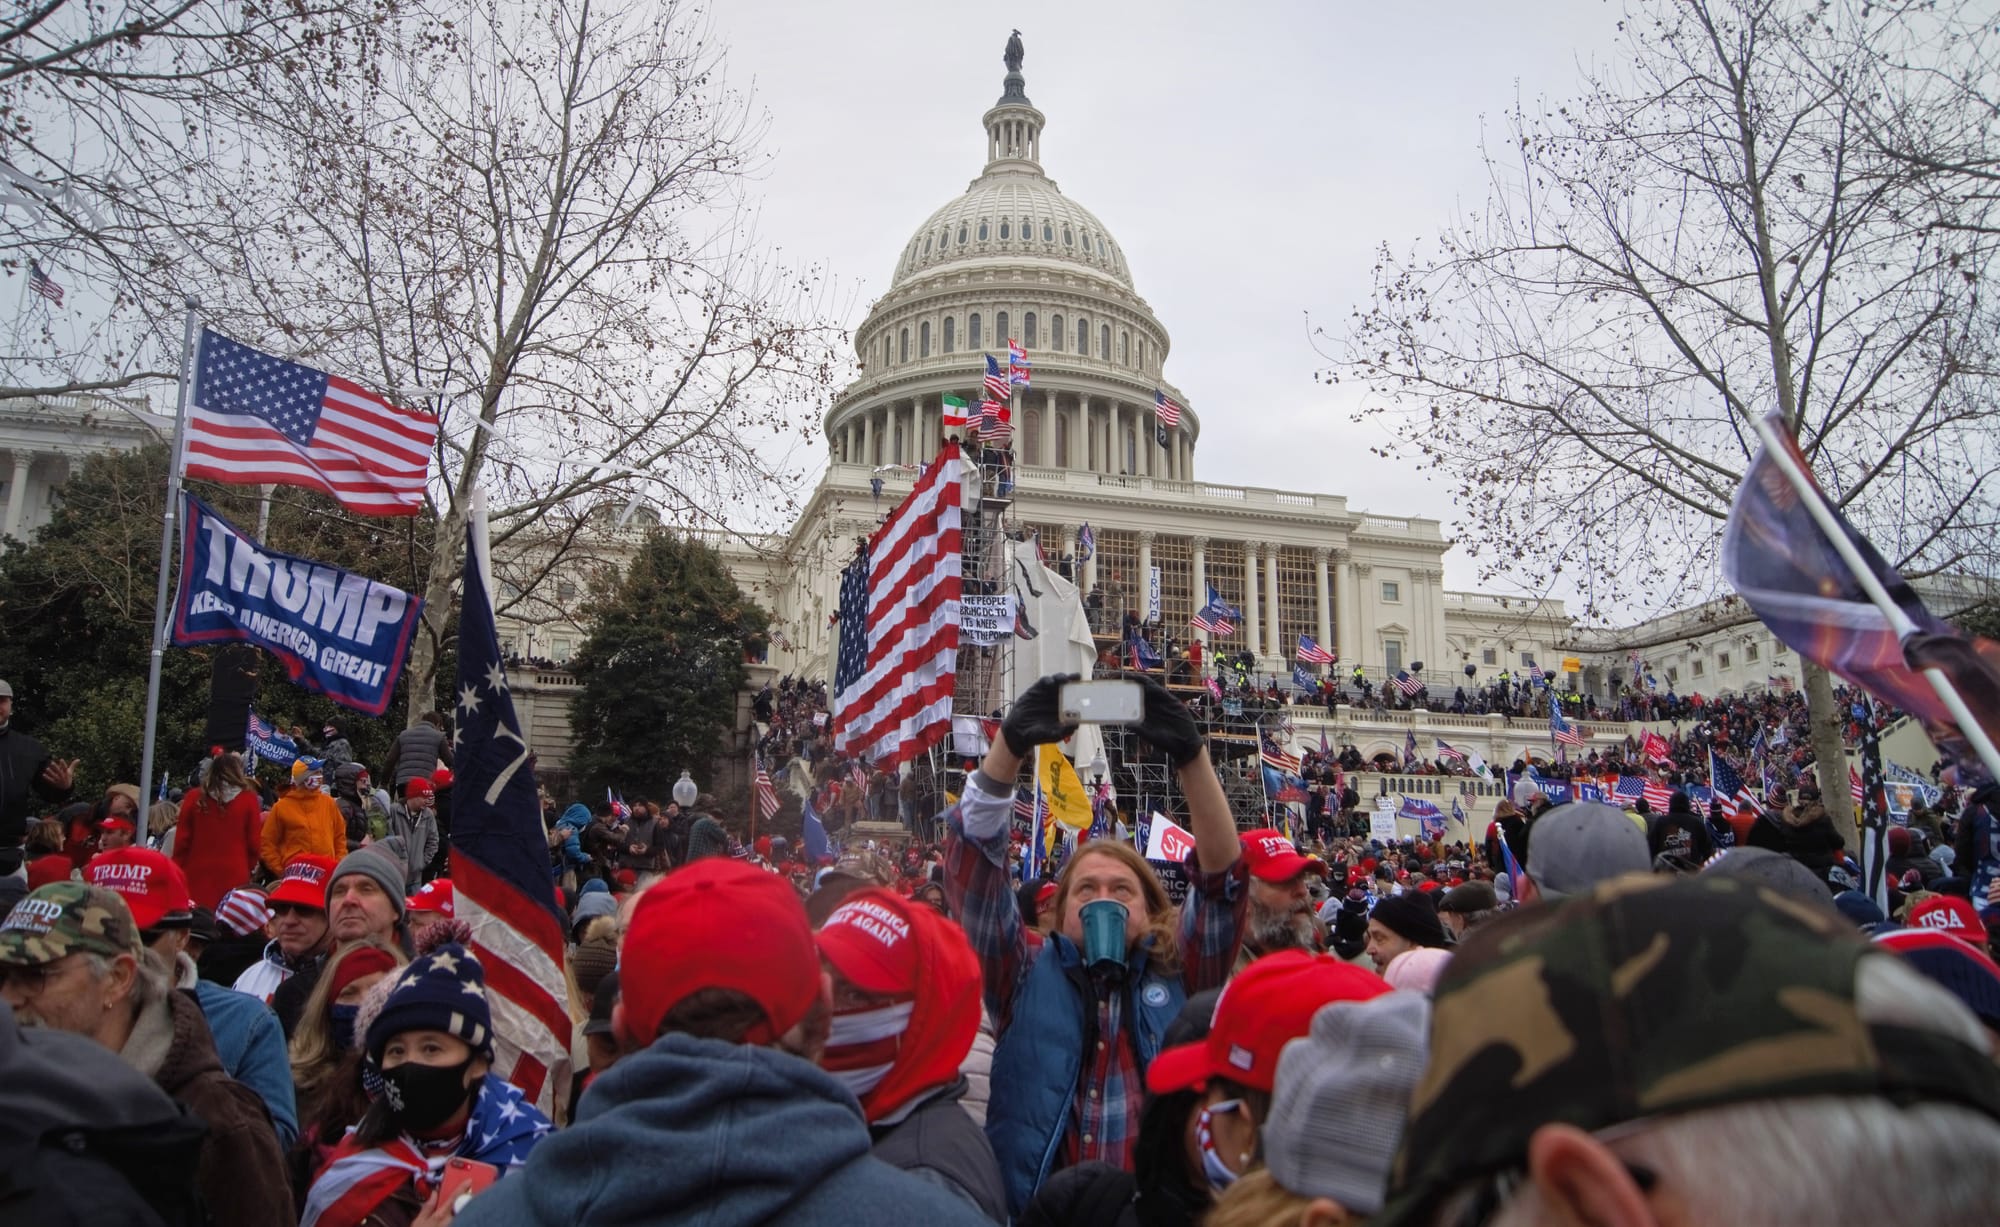 Rioters outside the US Capitol building holding US flags and "Make America Great Again" flags